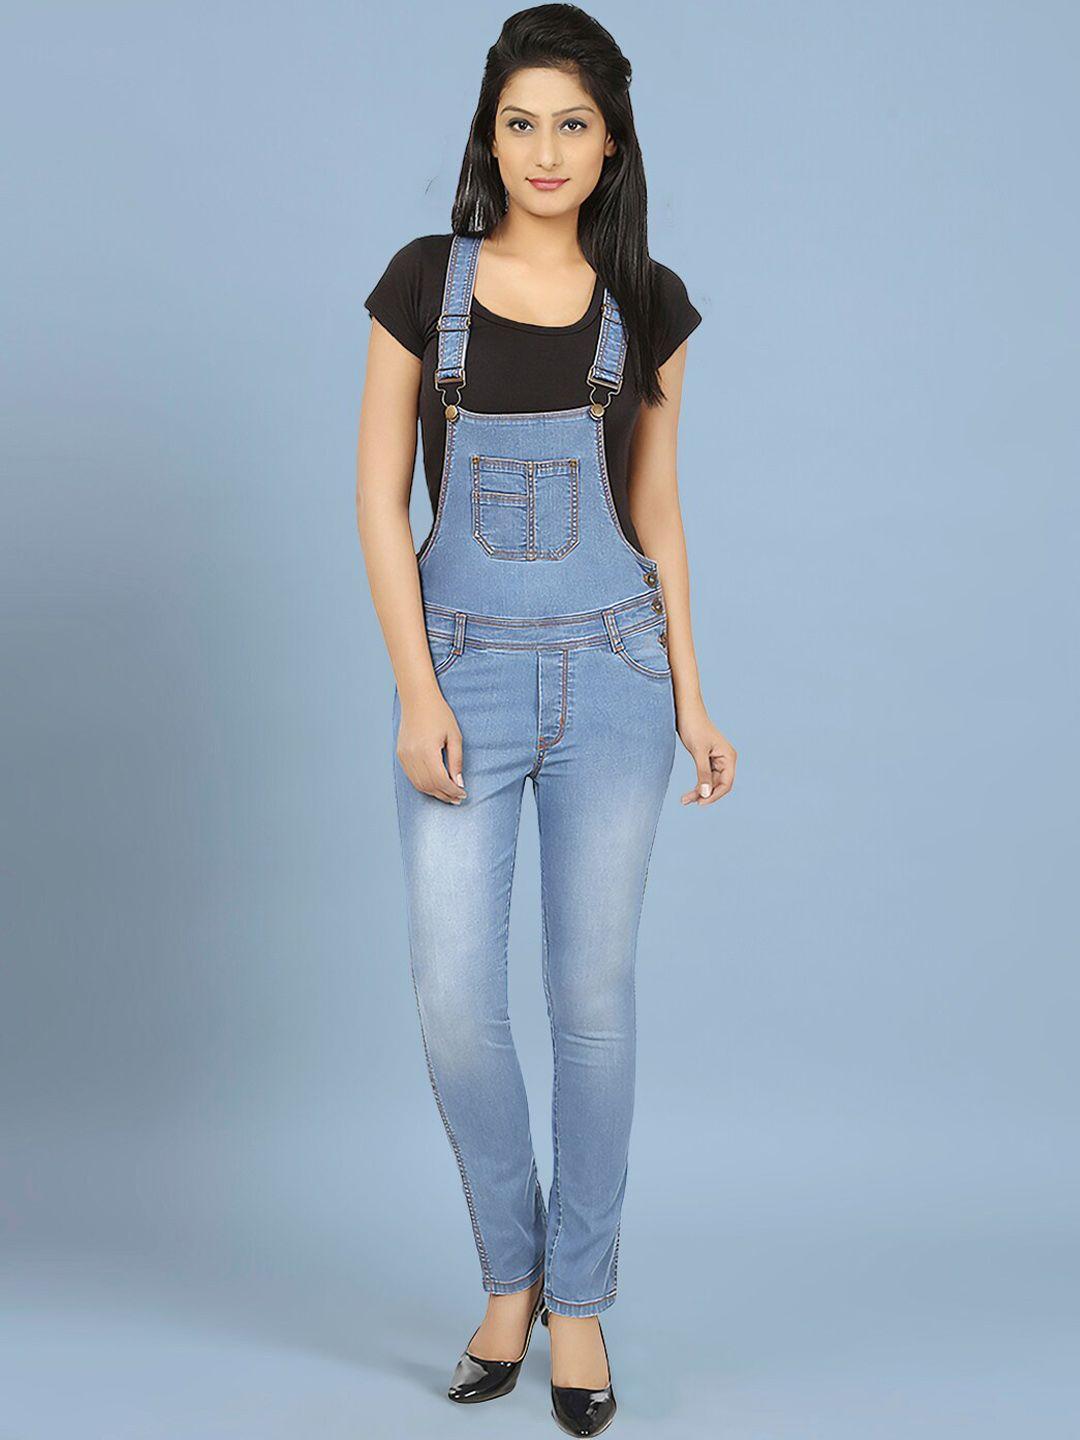 ursense women slim fit washed dungarees with t-shirt